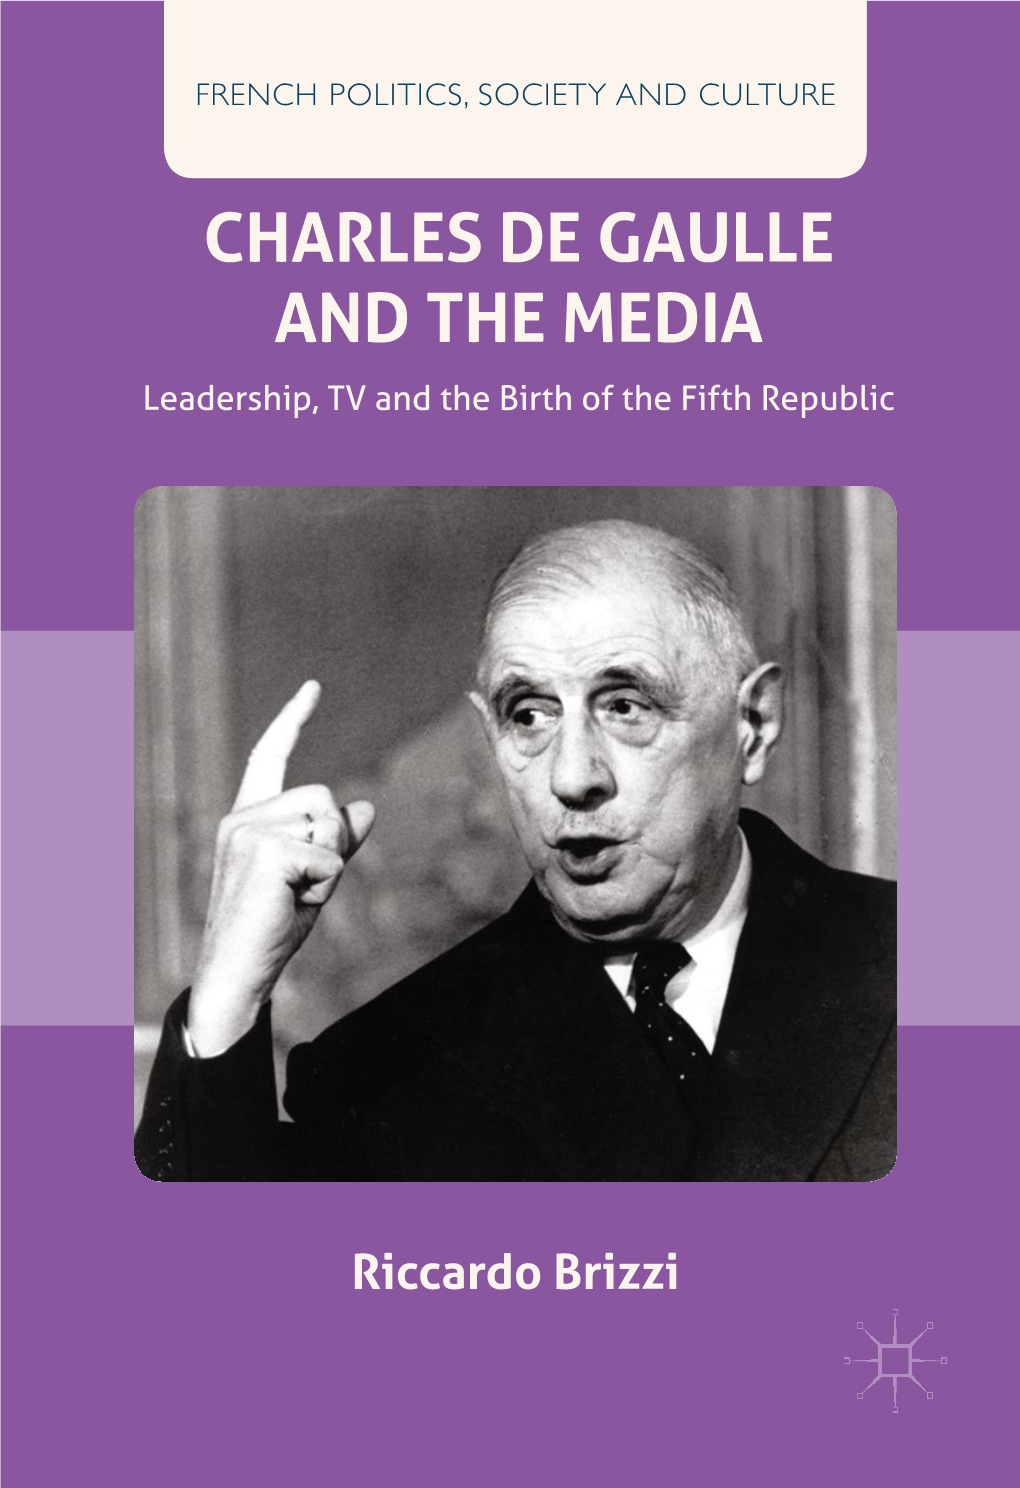 CHARLES DE GAULLE and the MEDIA Leadership, TV and the Birth of the Fifth Republic